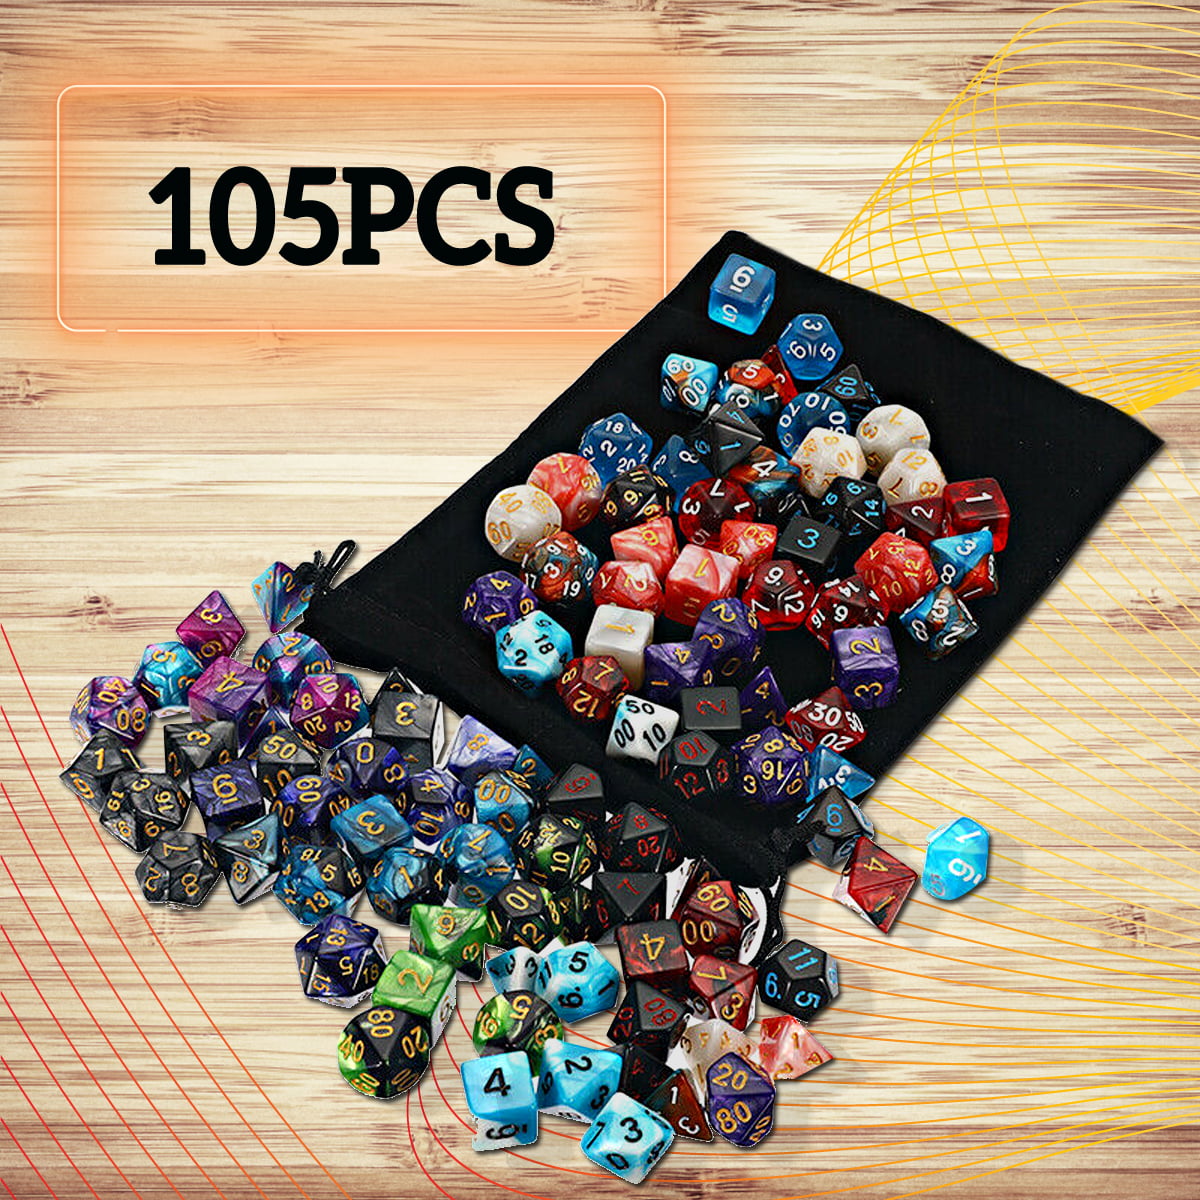 42Pcs Polyhedral Dice with Bag For DND RPG MTG Role Playing Board Game 6 Set 